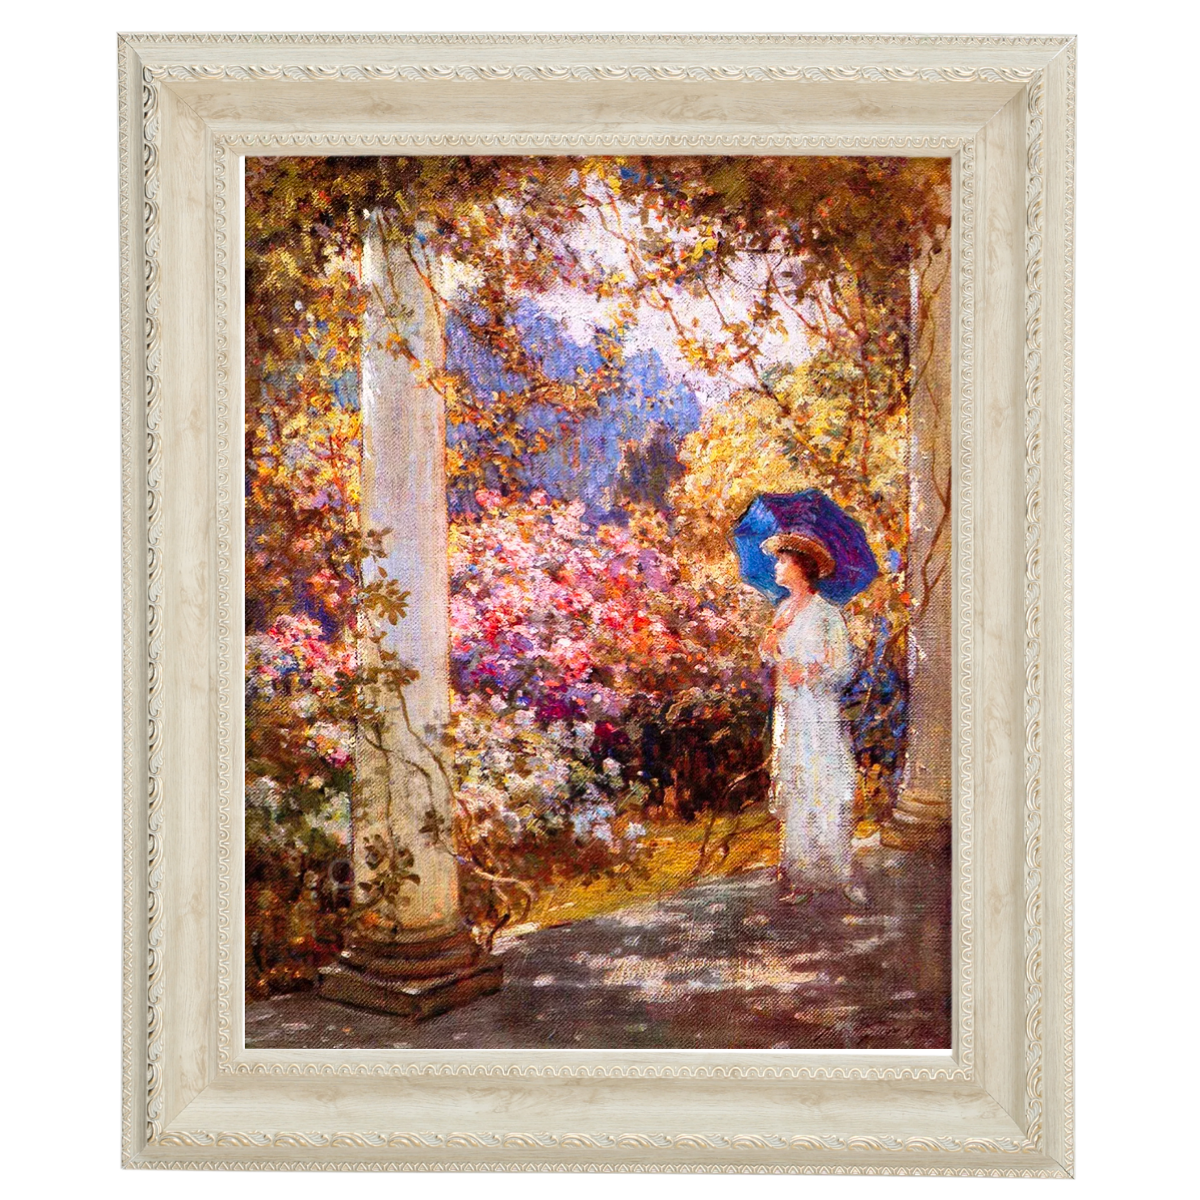 A Summer's Day - Vintage Wall Art Prints Decor For Living Room